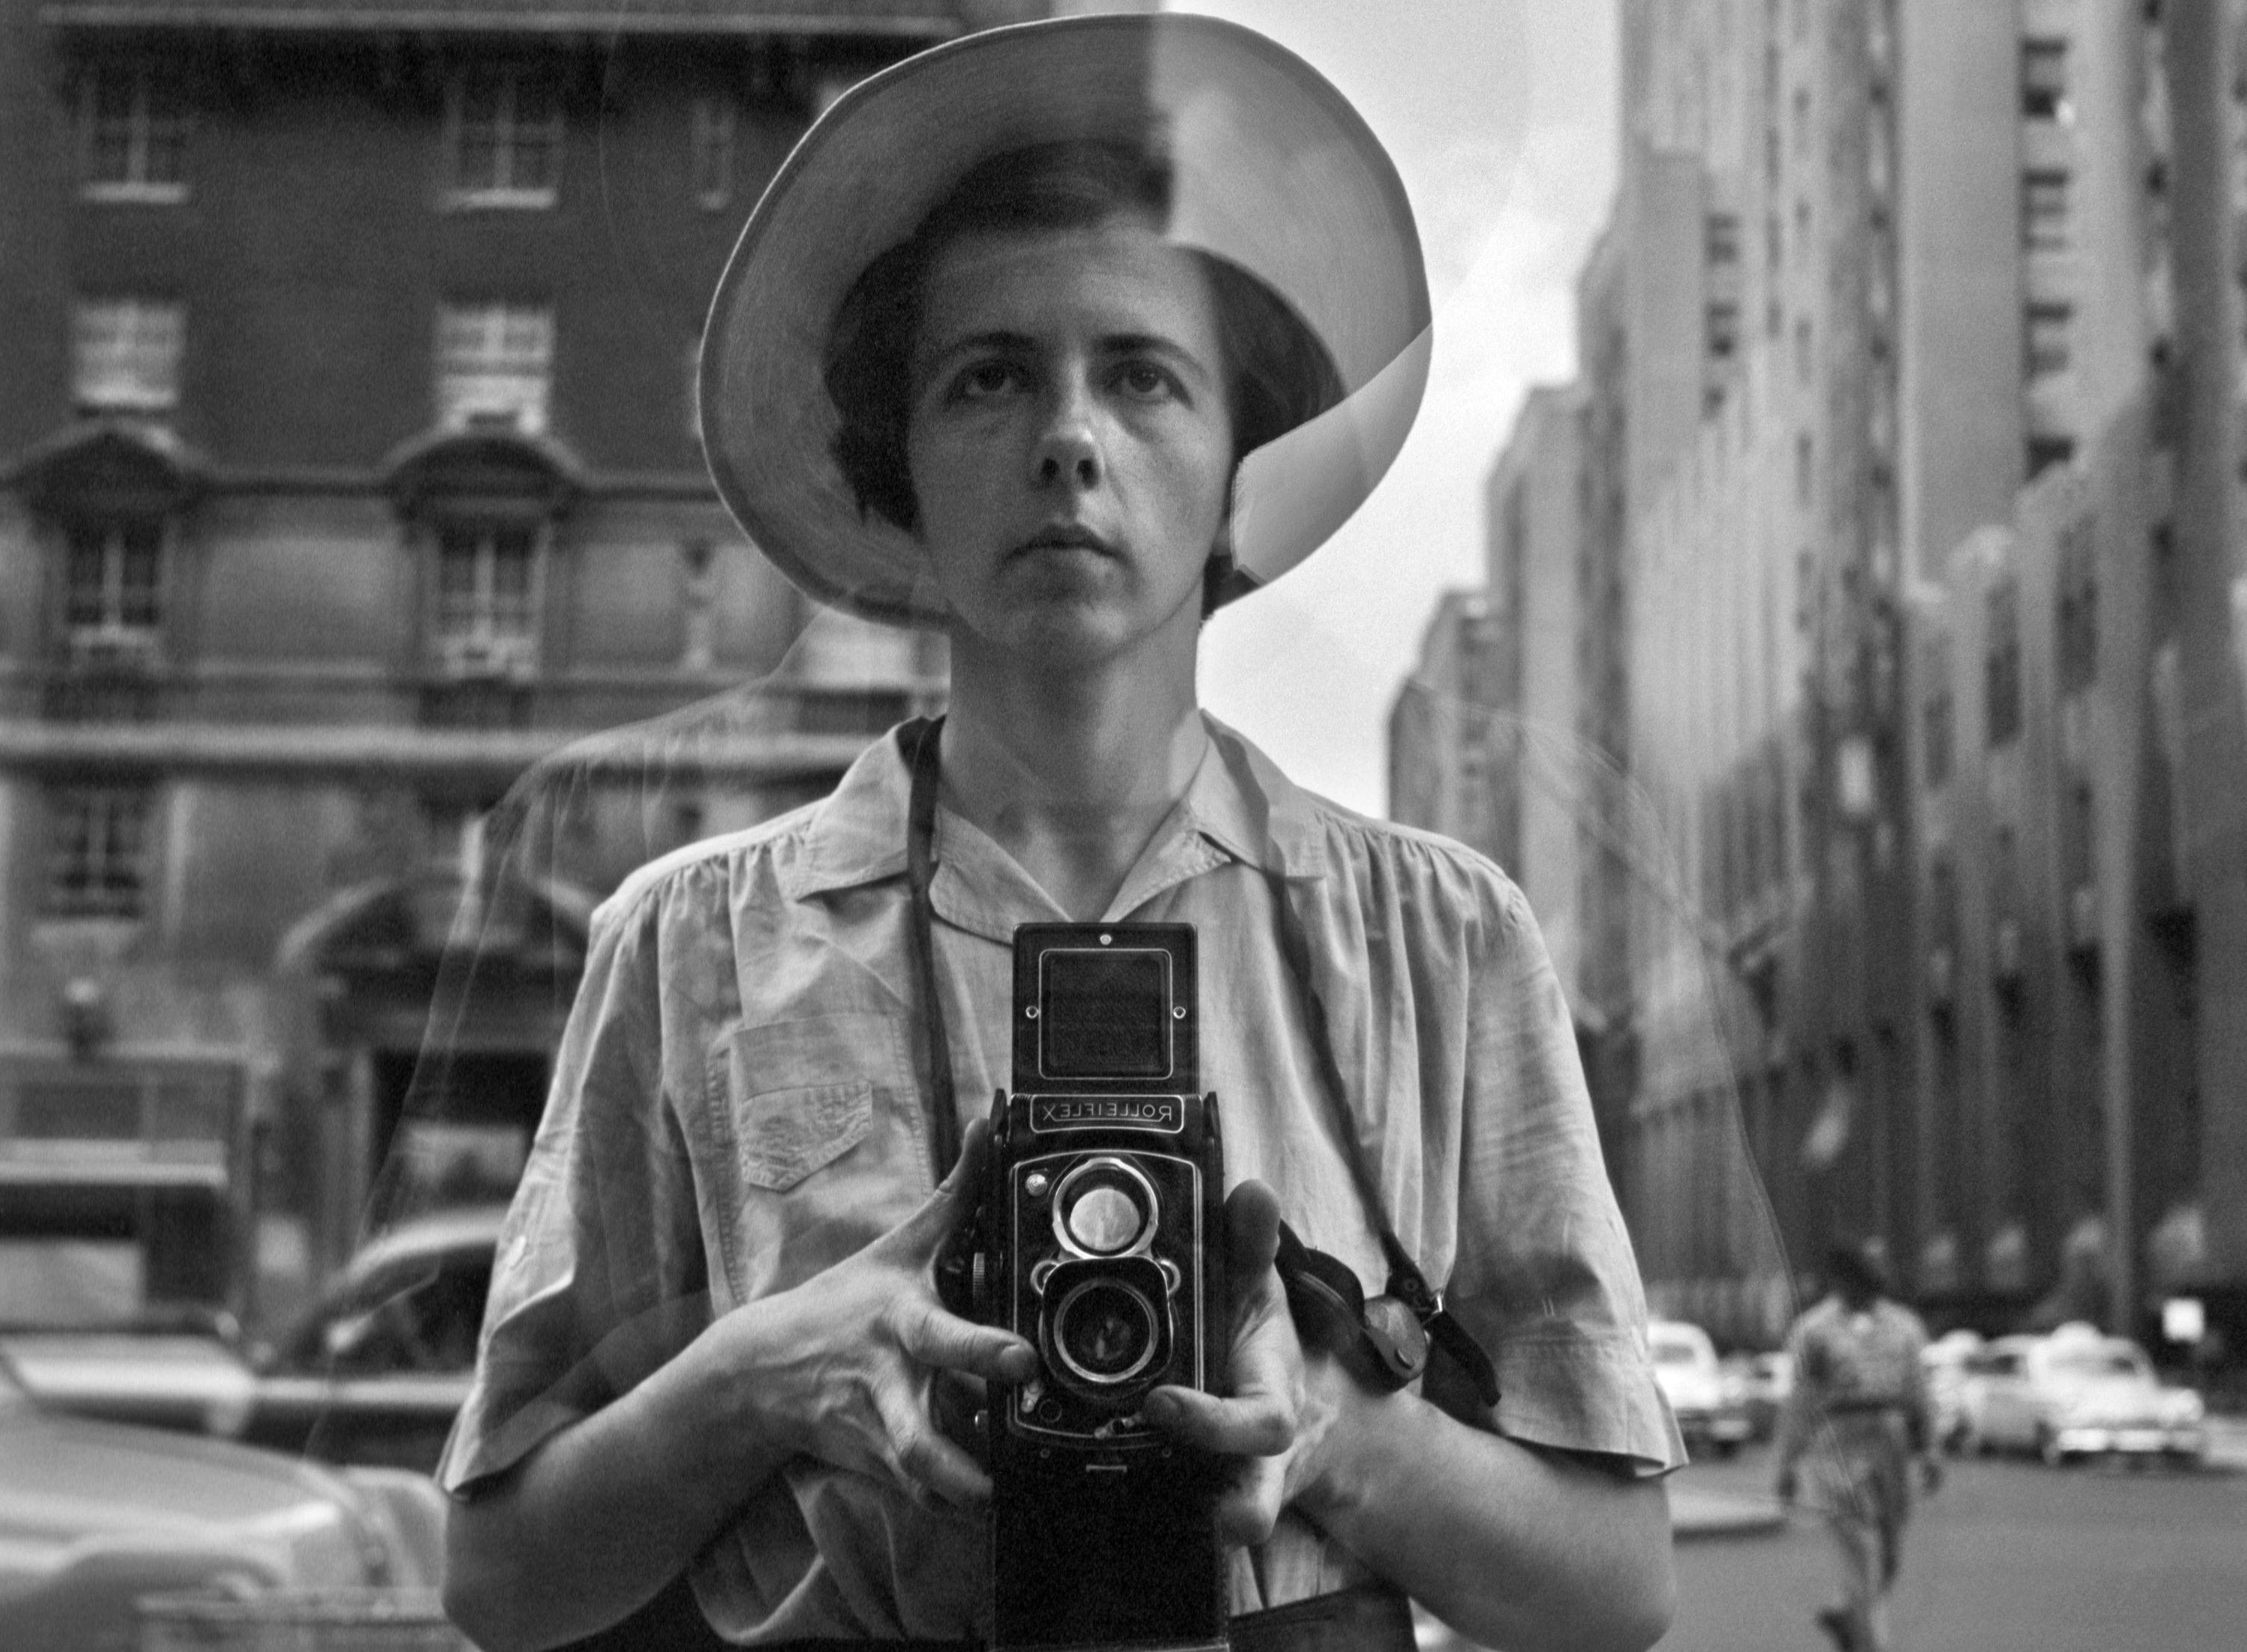 This must-see exhibit showcases work by one of the greatest photographers of the 20th century